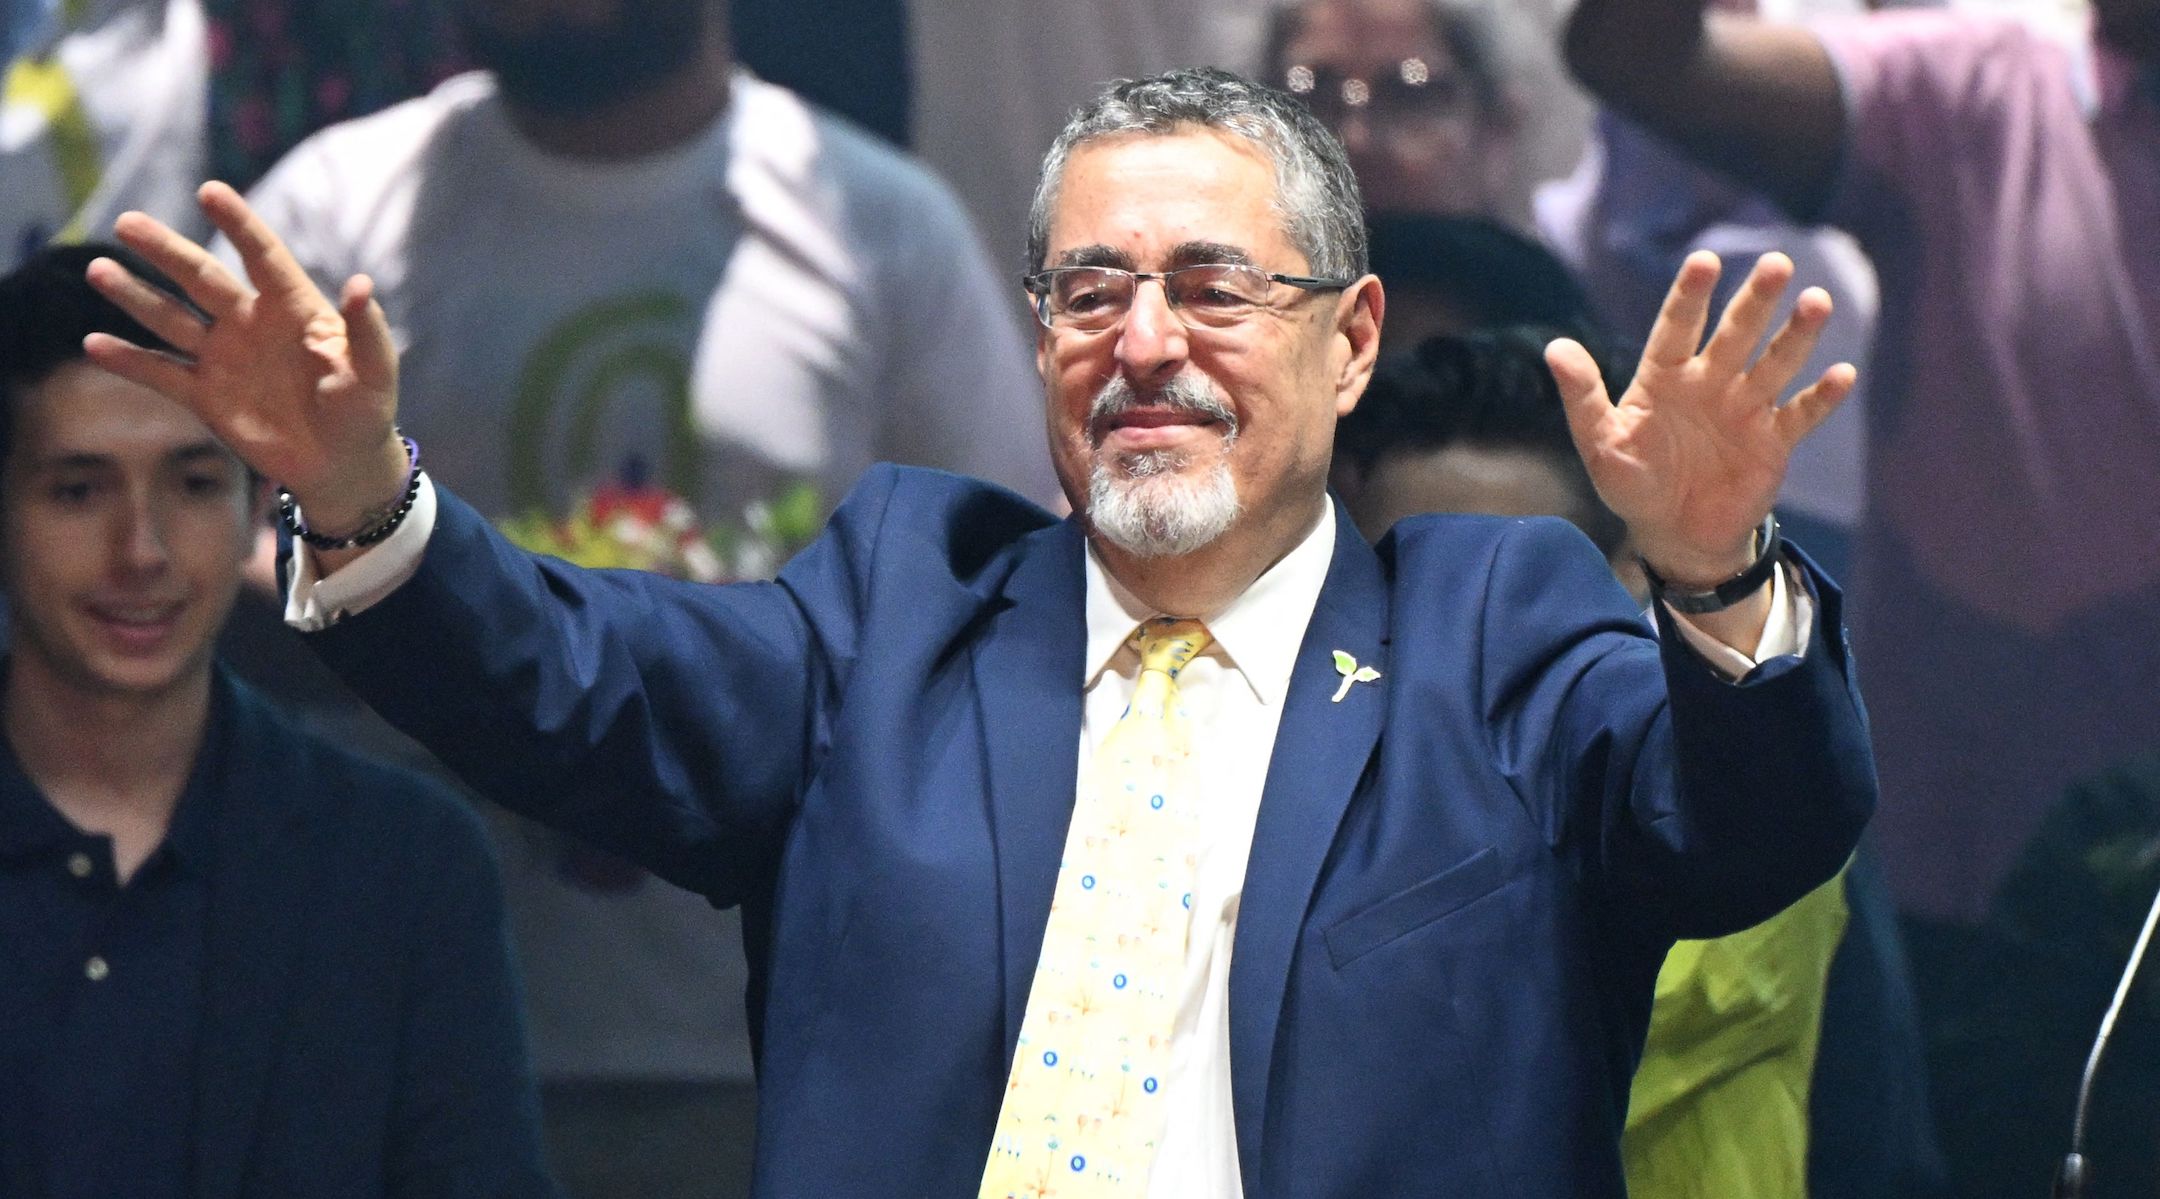 Bernardo Arevalo greets supporters at a campaign event in Guatemala City, Aug. 16, 2023. (Luis Acosta/AFP via Getty Images)